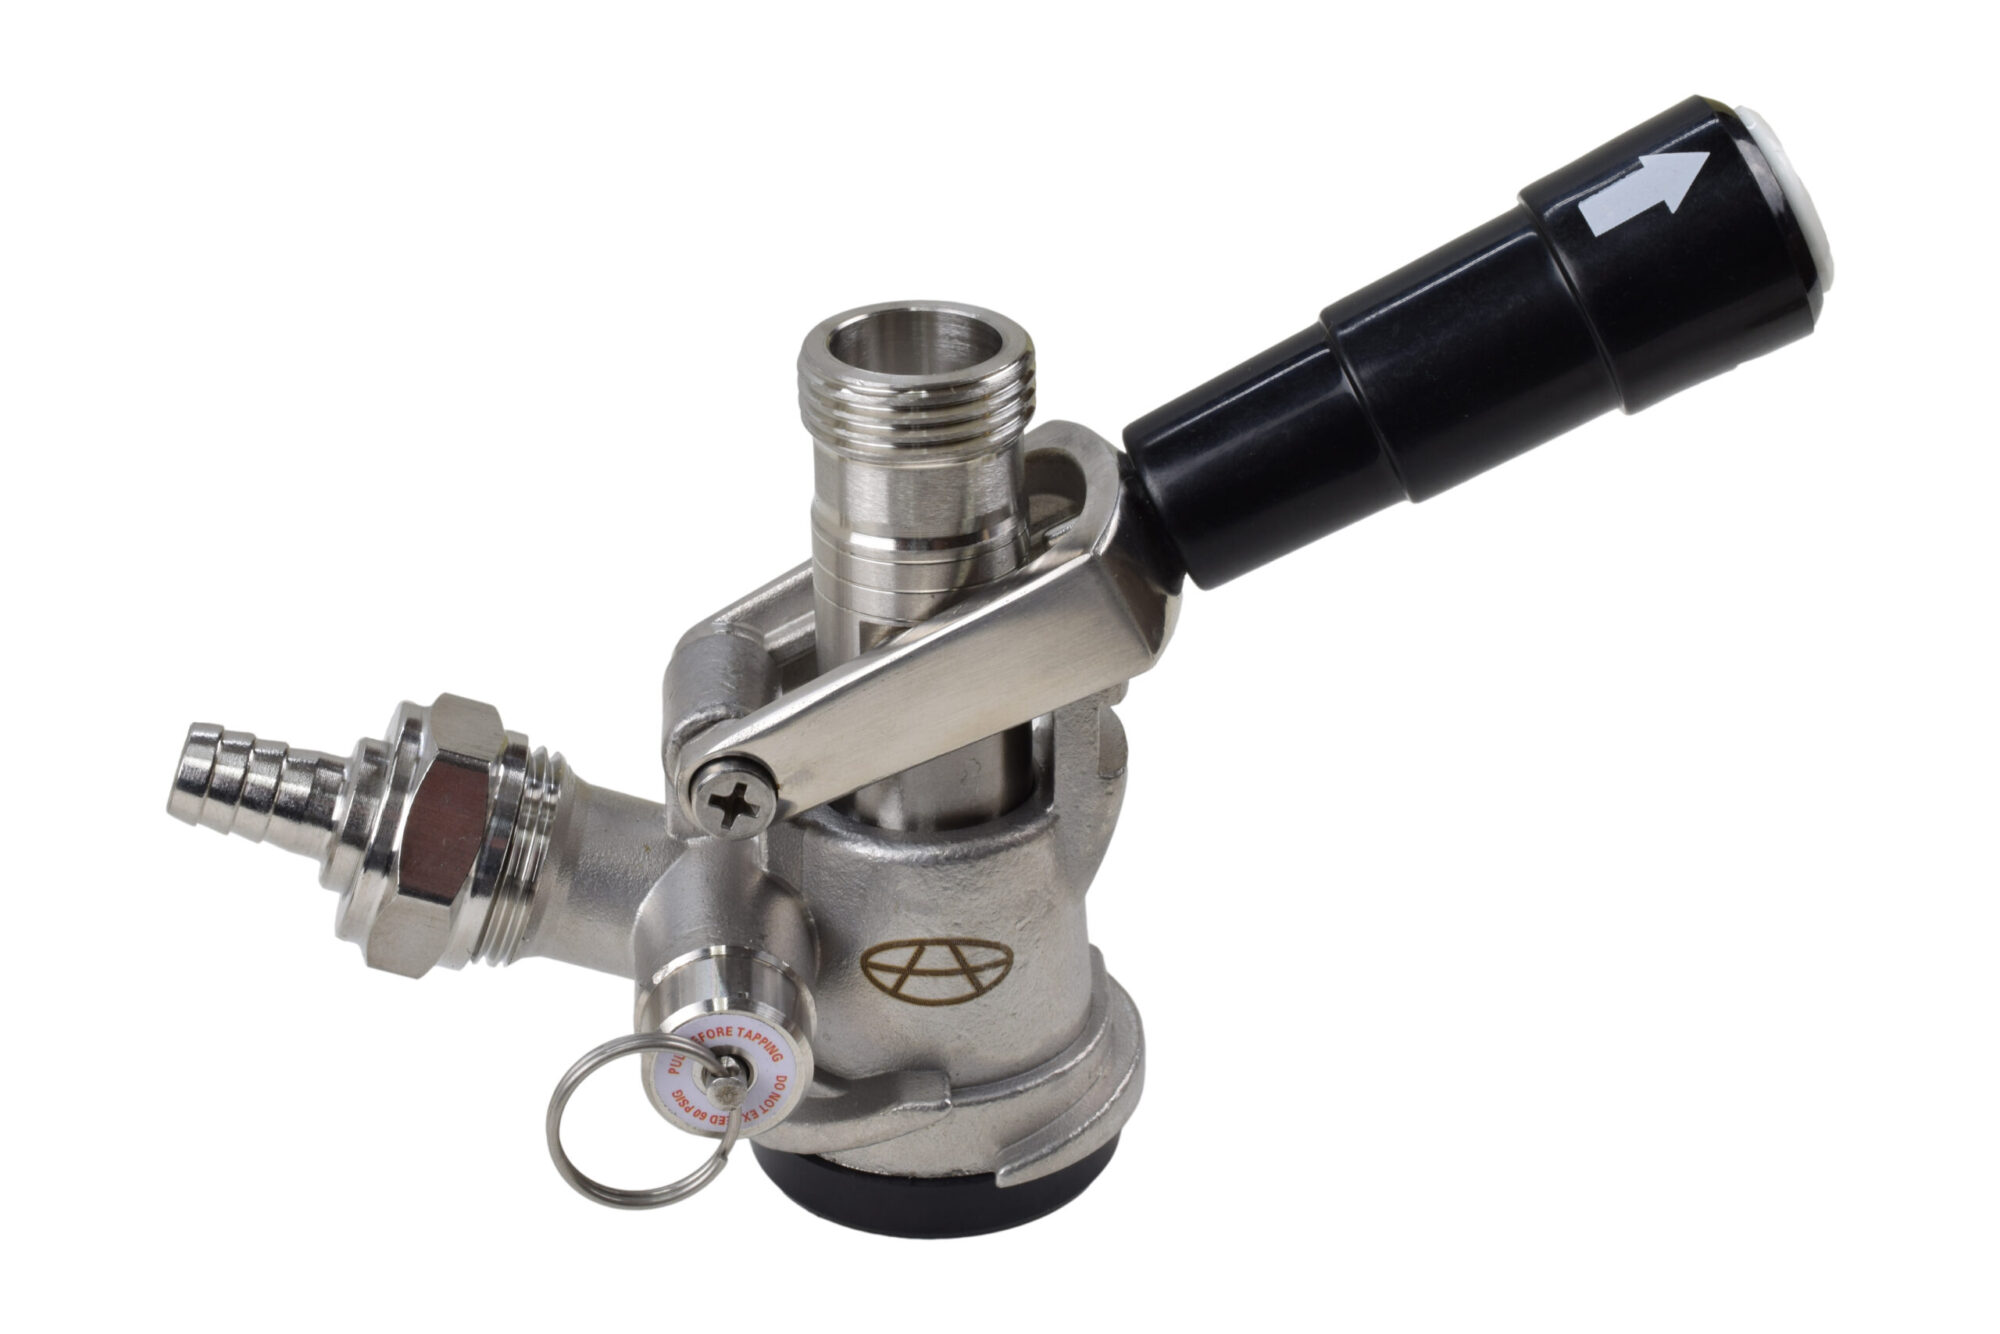 55SS-X "D" Style Keg Coupler with a 304 Stainless Steel Body and Probe